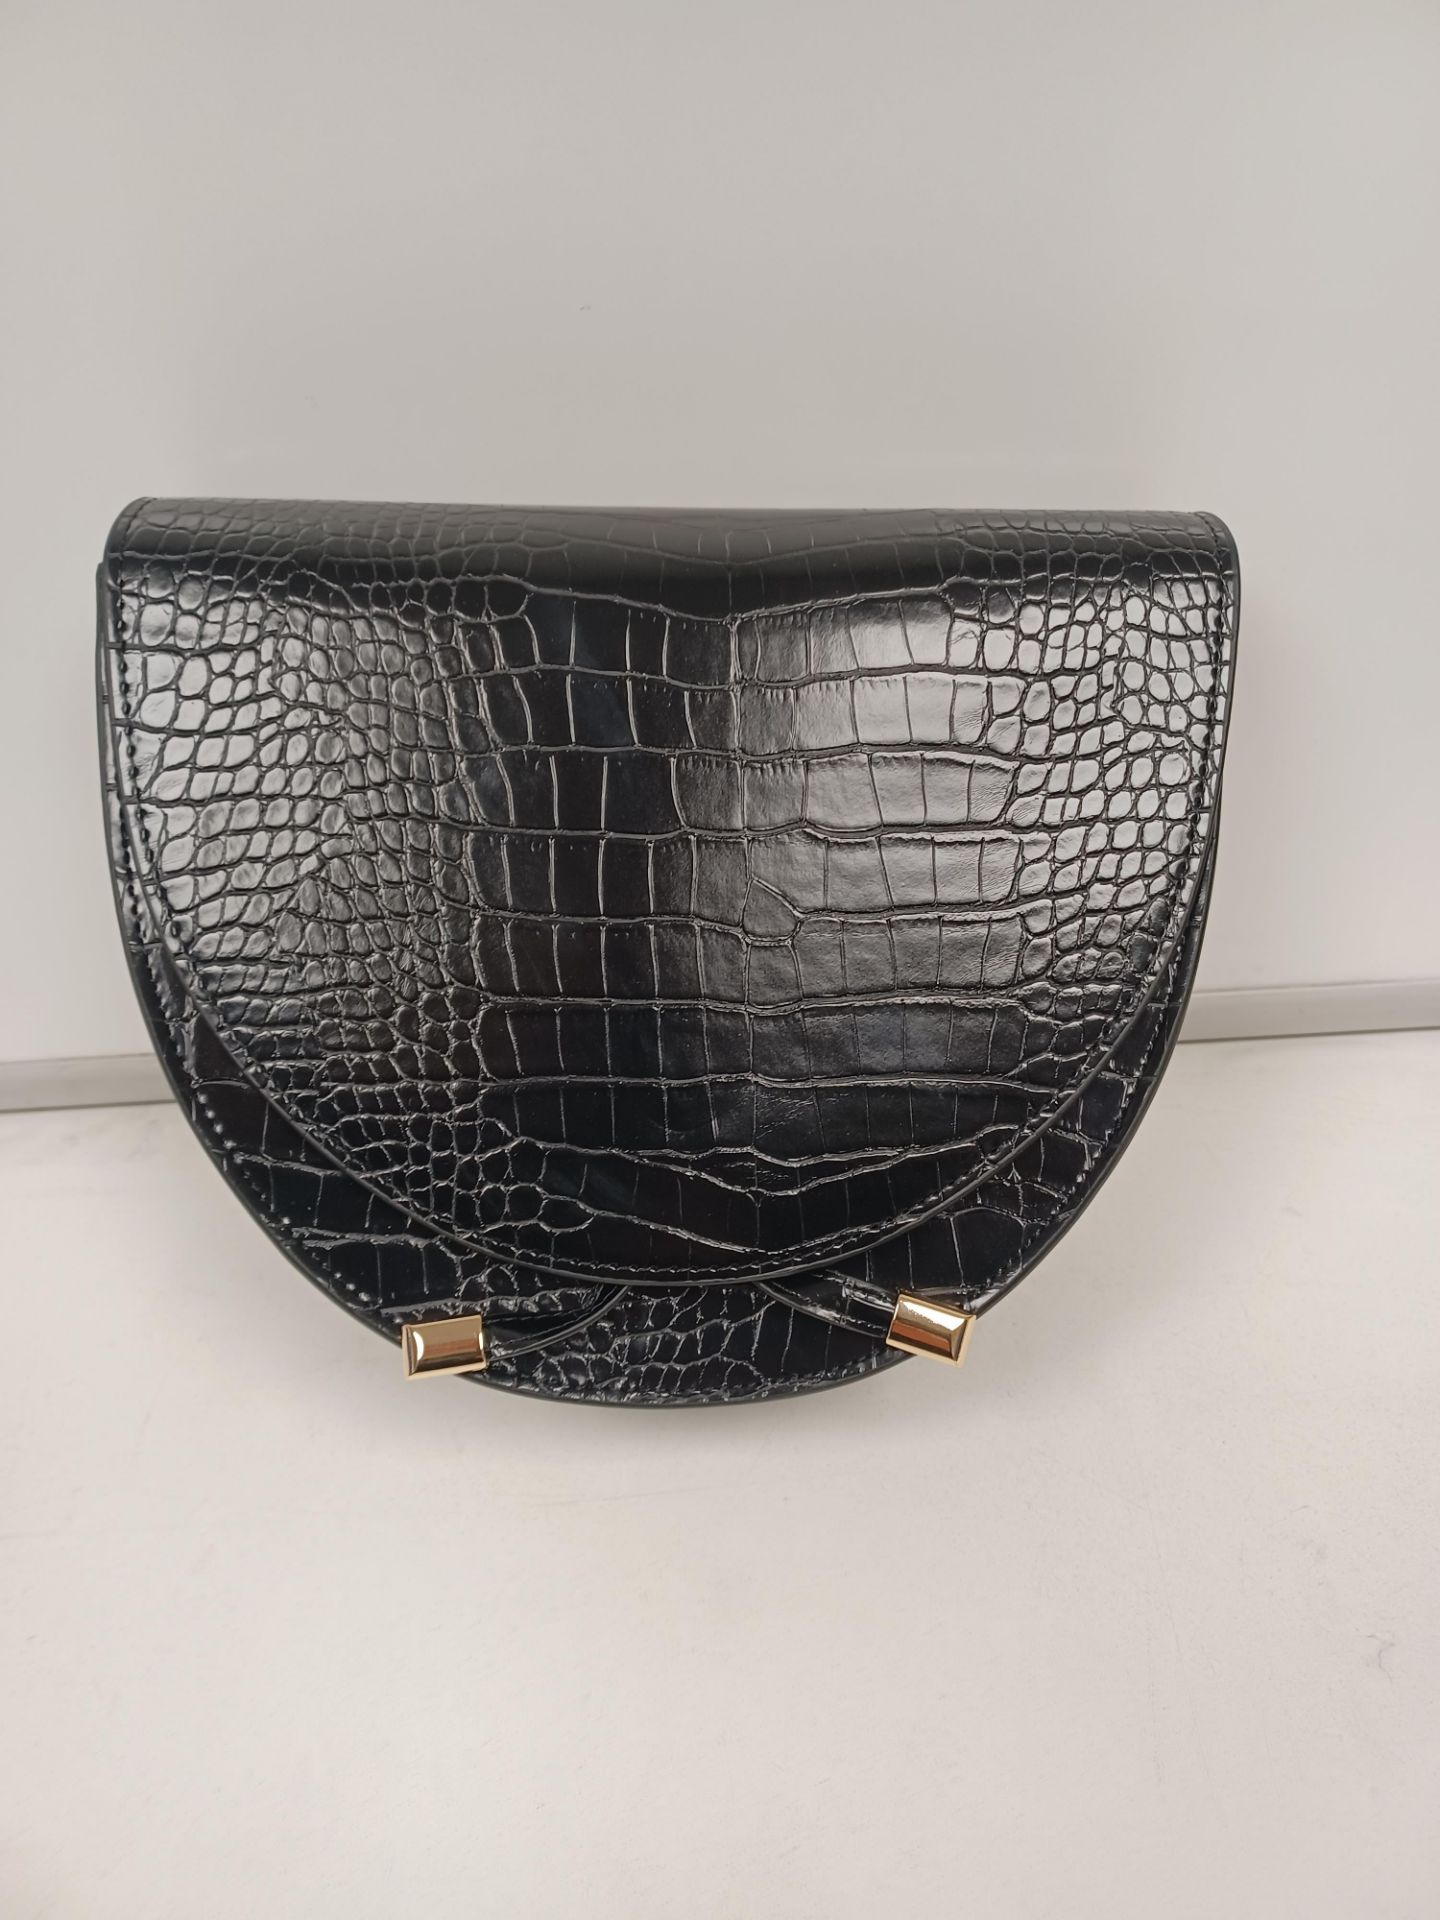 5 X NEW PACKAGED BEAUTIFY LEATHER EFFECT SNAKE SKIN SHOULDER BAGS. RRP £55 EACH. ROW 1